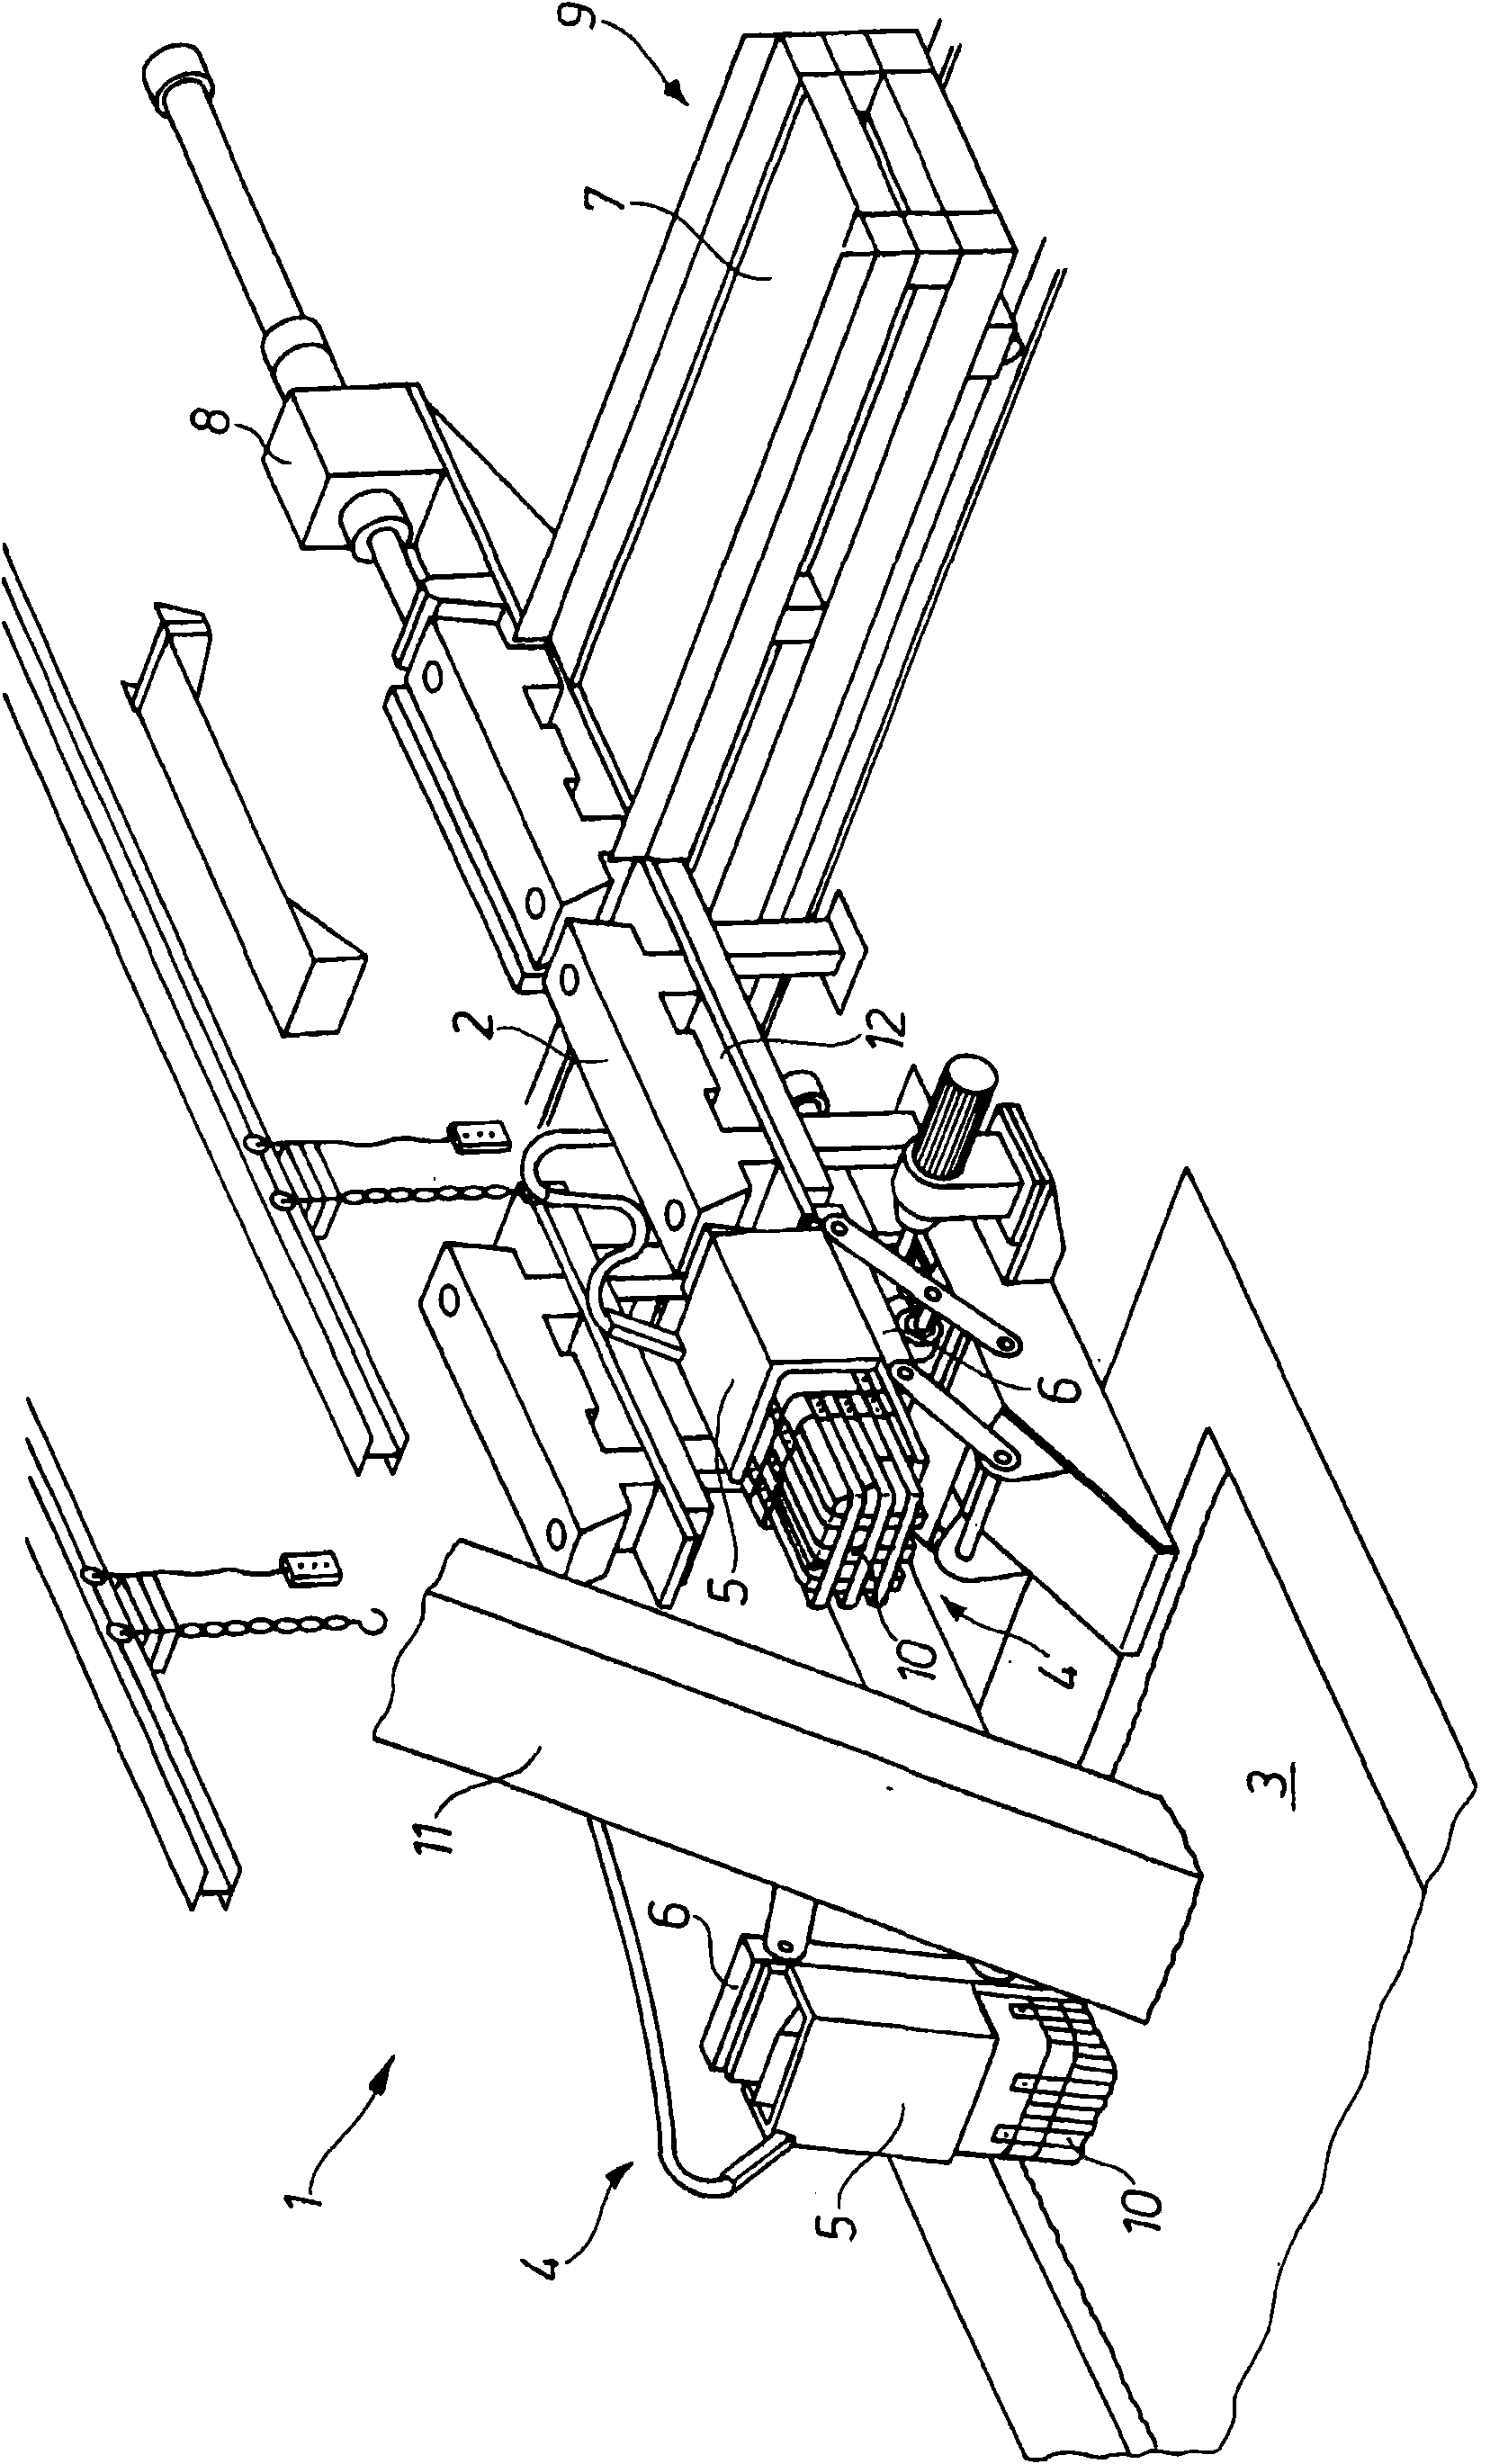 Device for introducing metal bars into a metal bath